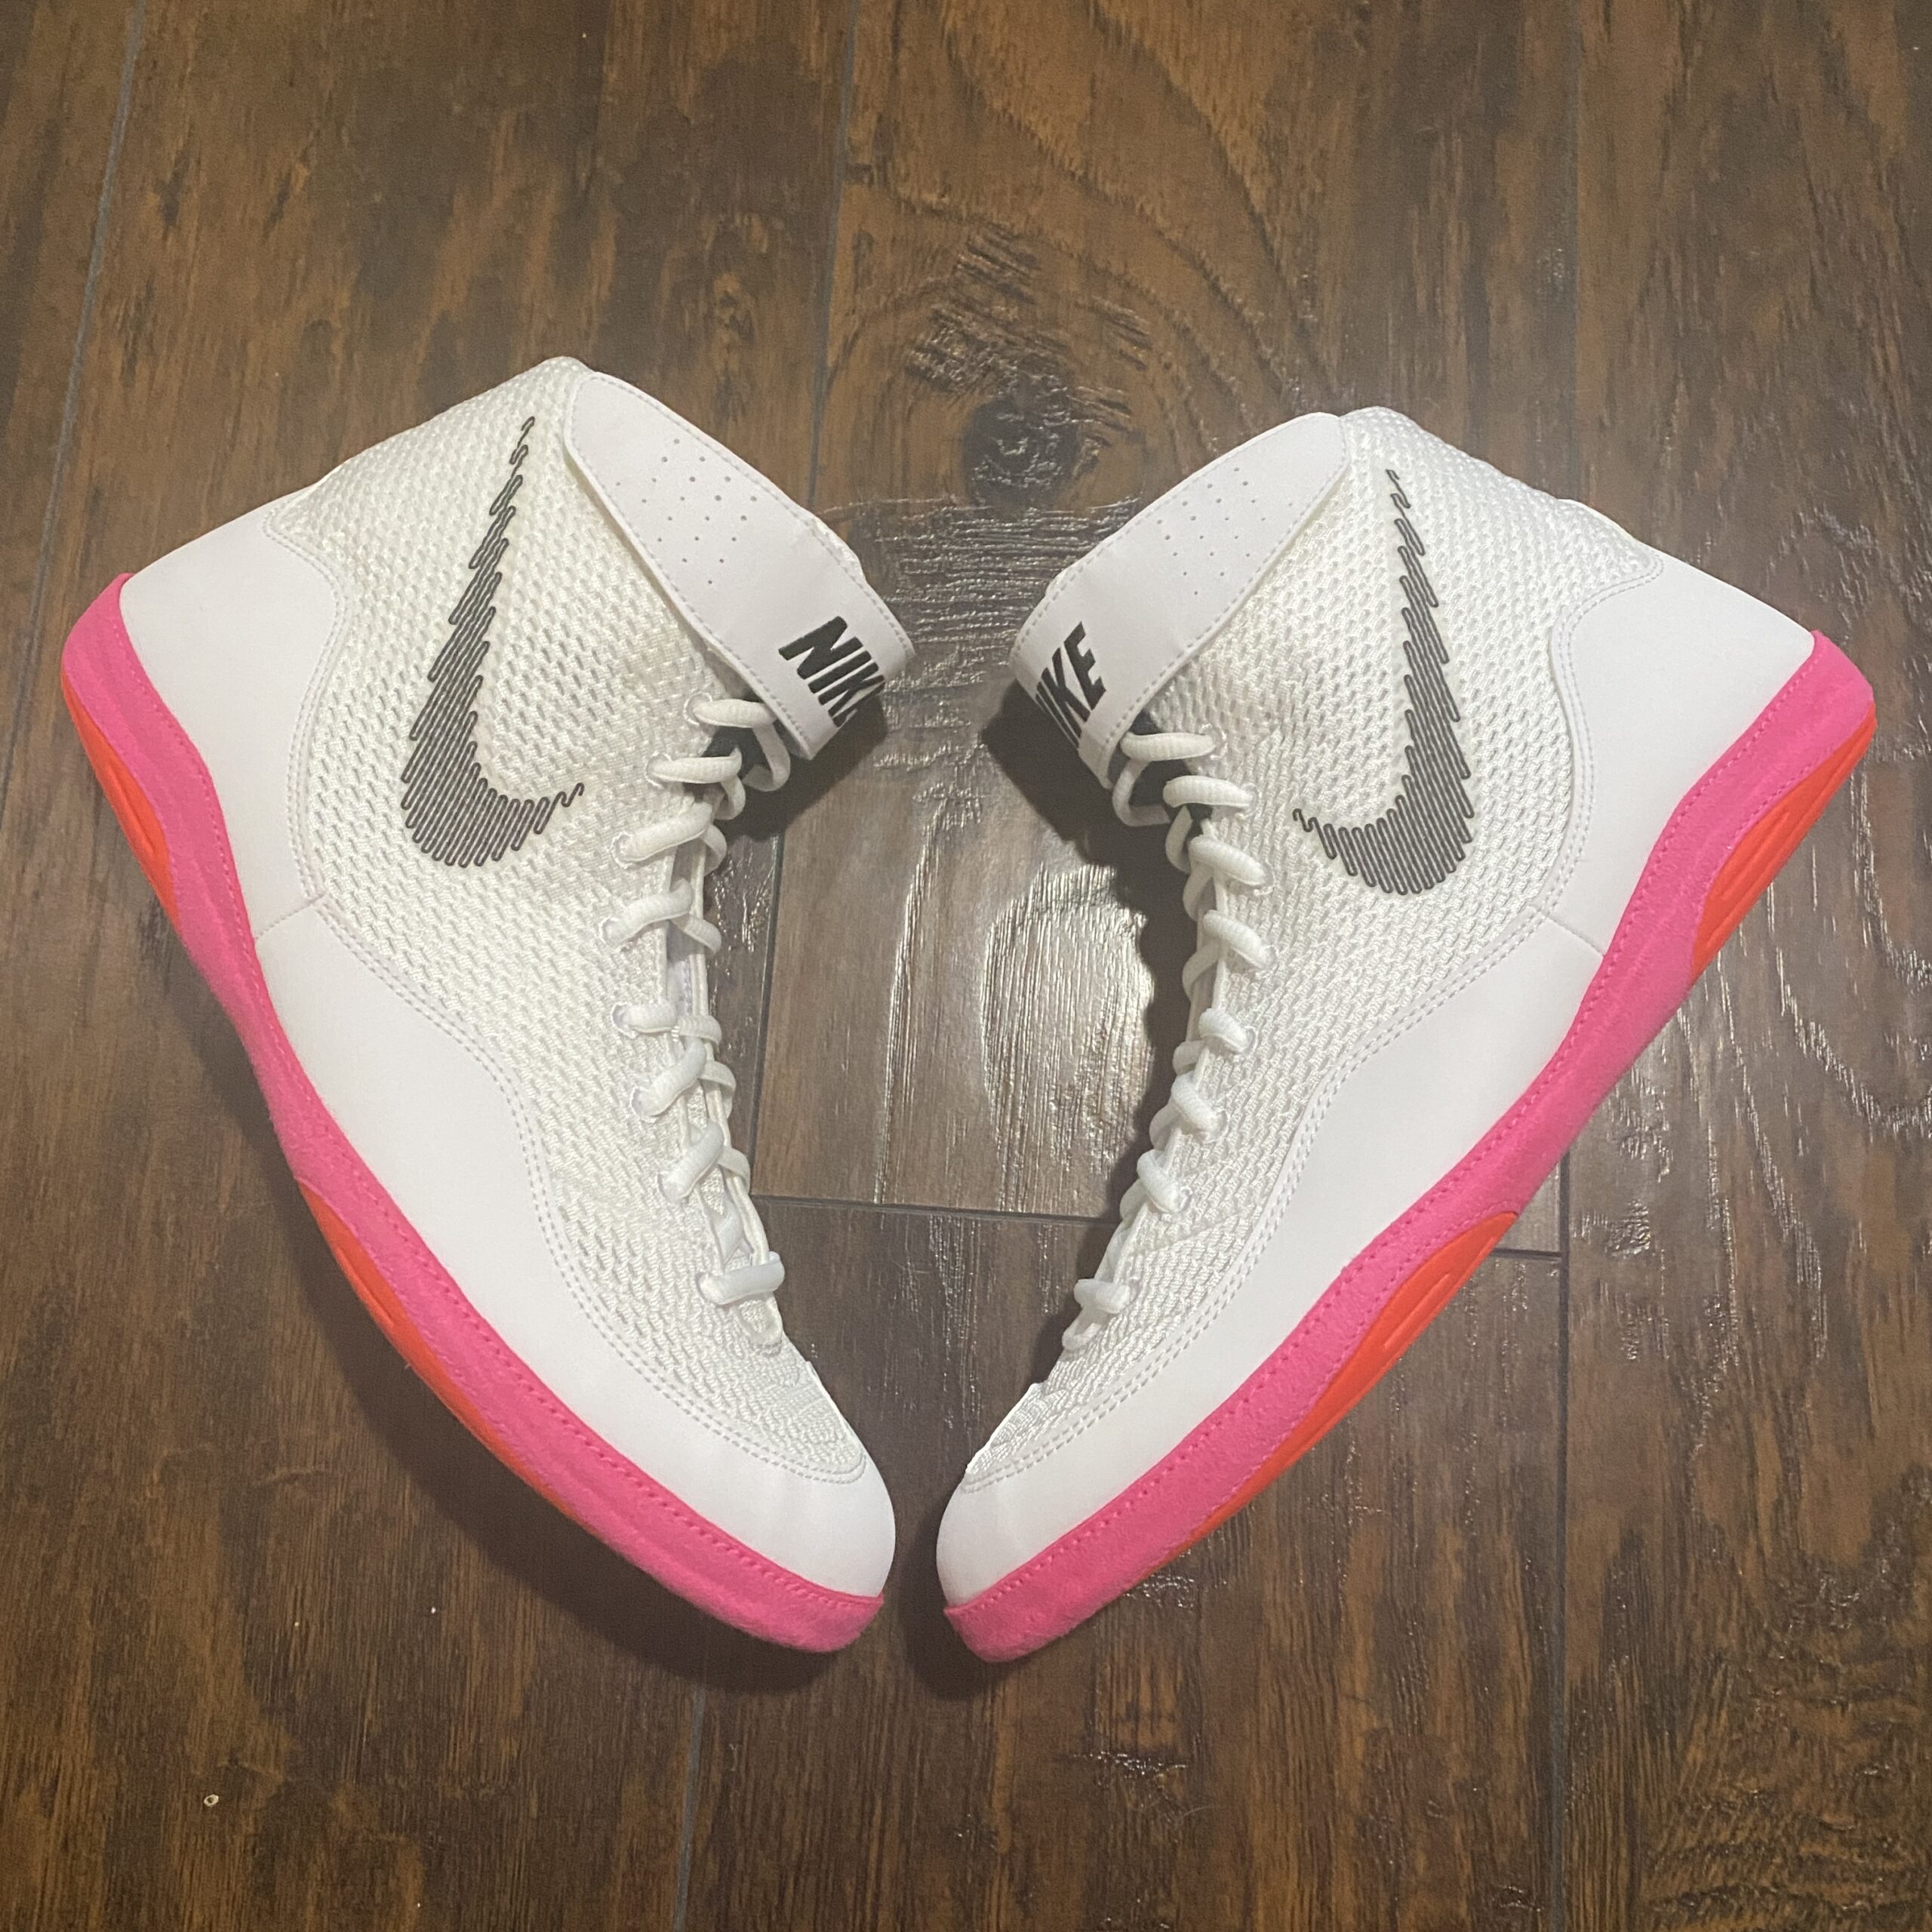 Nike Tokyo Olympic nike wrestling shoes pink Edition Inflict SE Wrestling Shoes